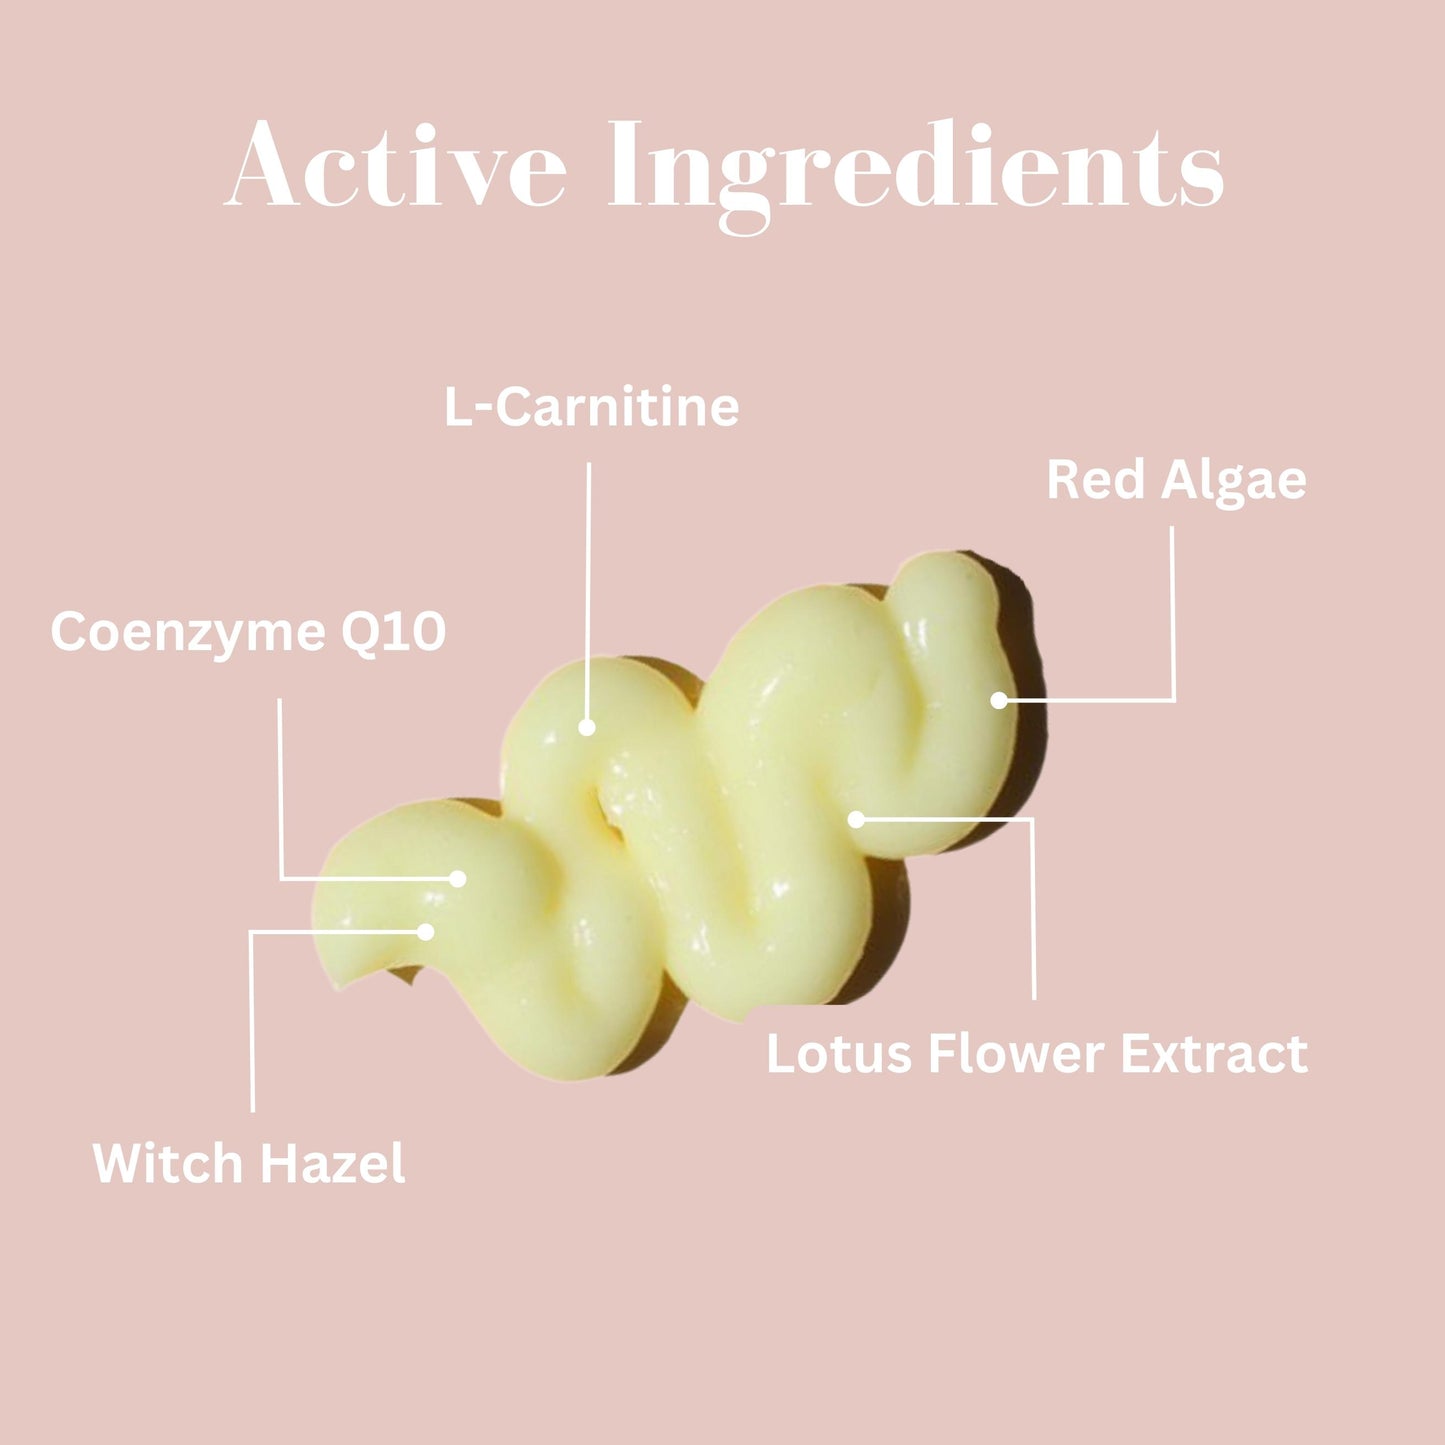 lifes butter anti cellulite cream active ingredients